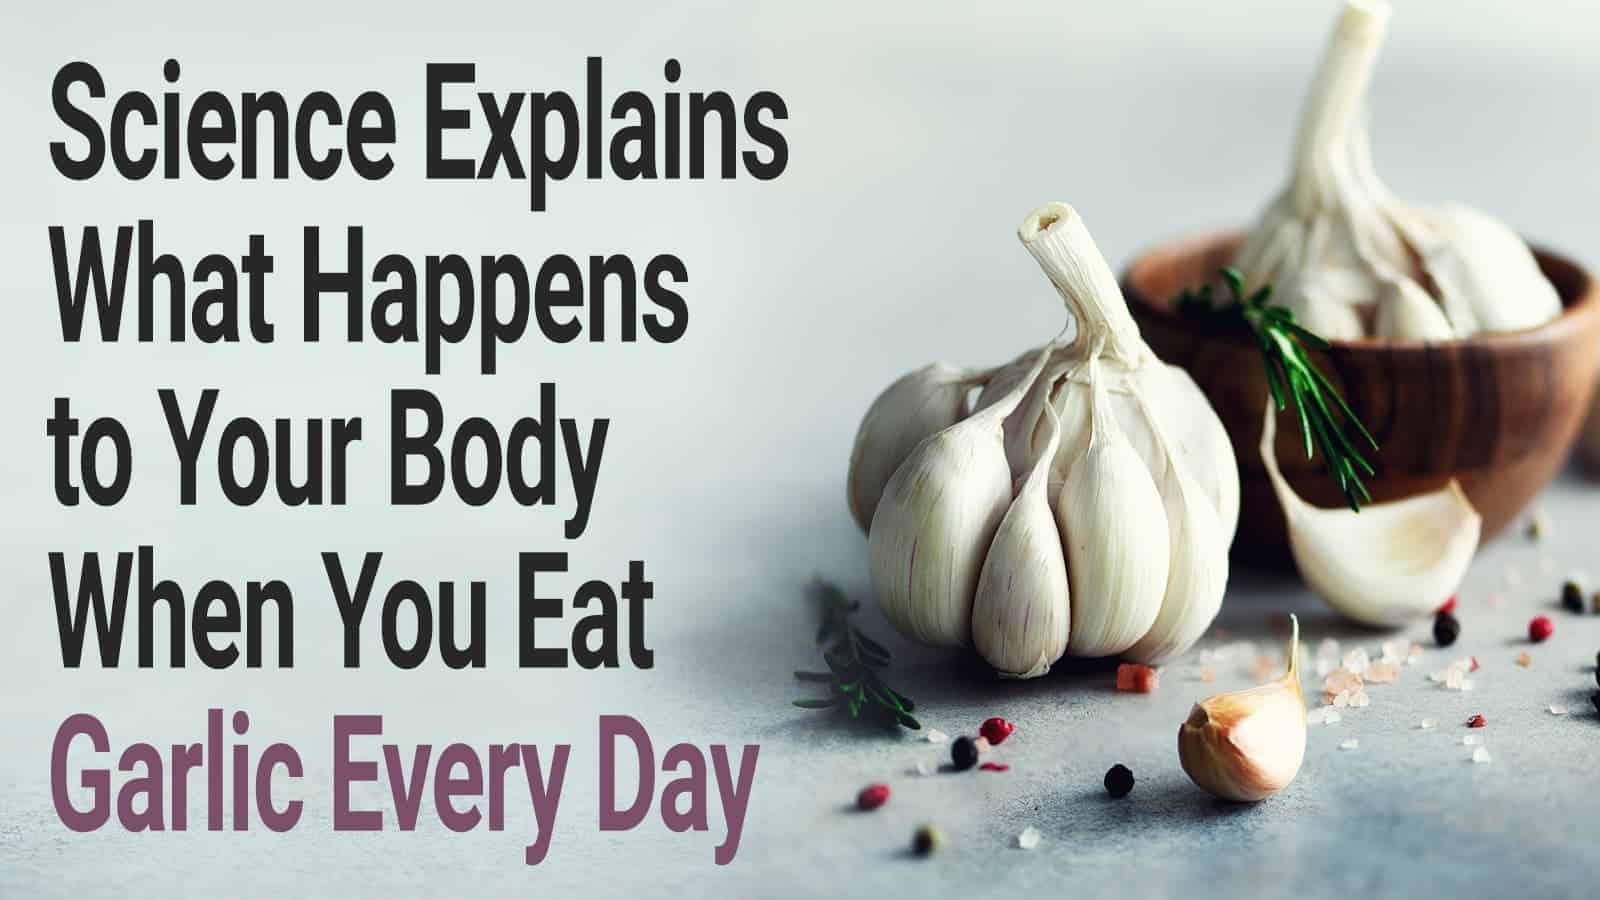 Science Explains What Happens to Your Body When You Eat Garlic Every Day